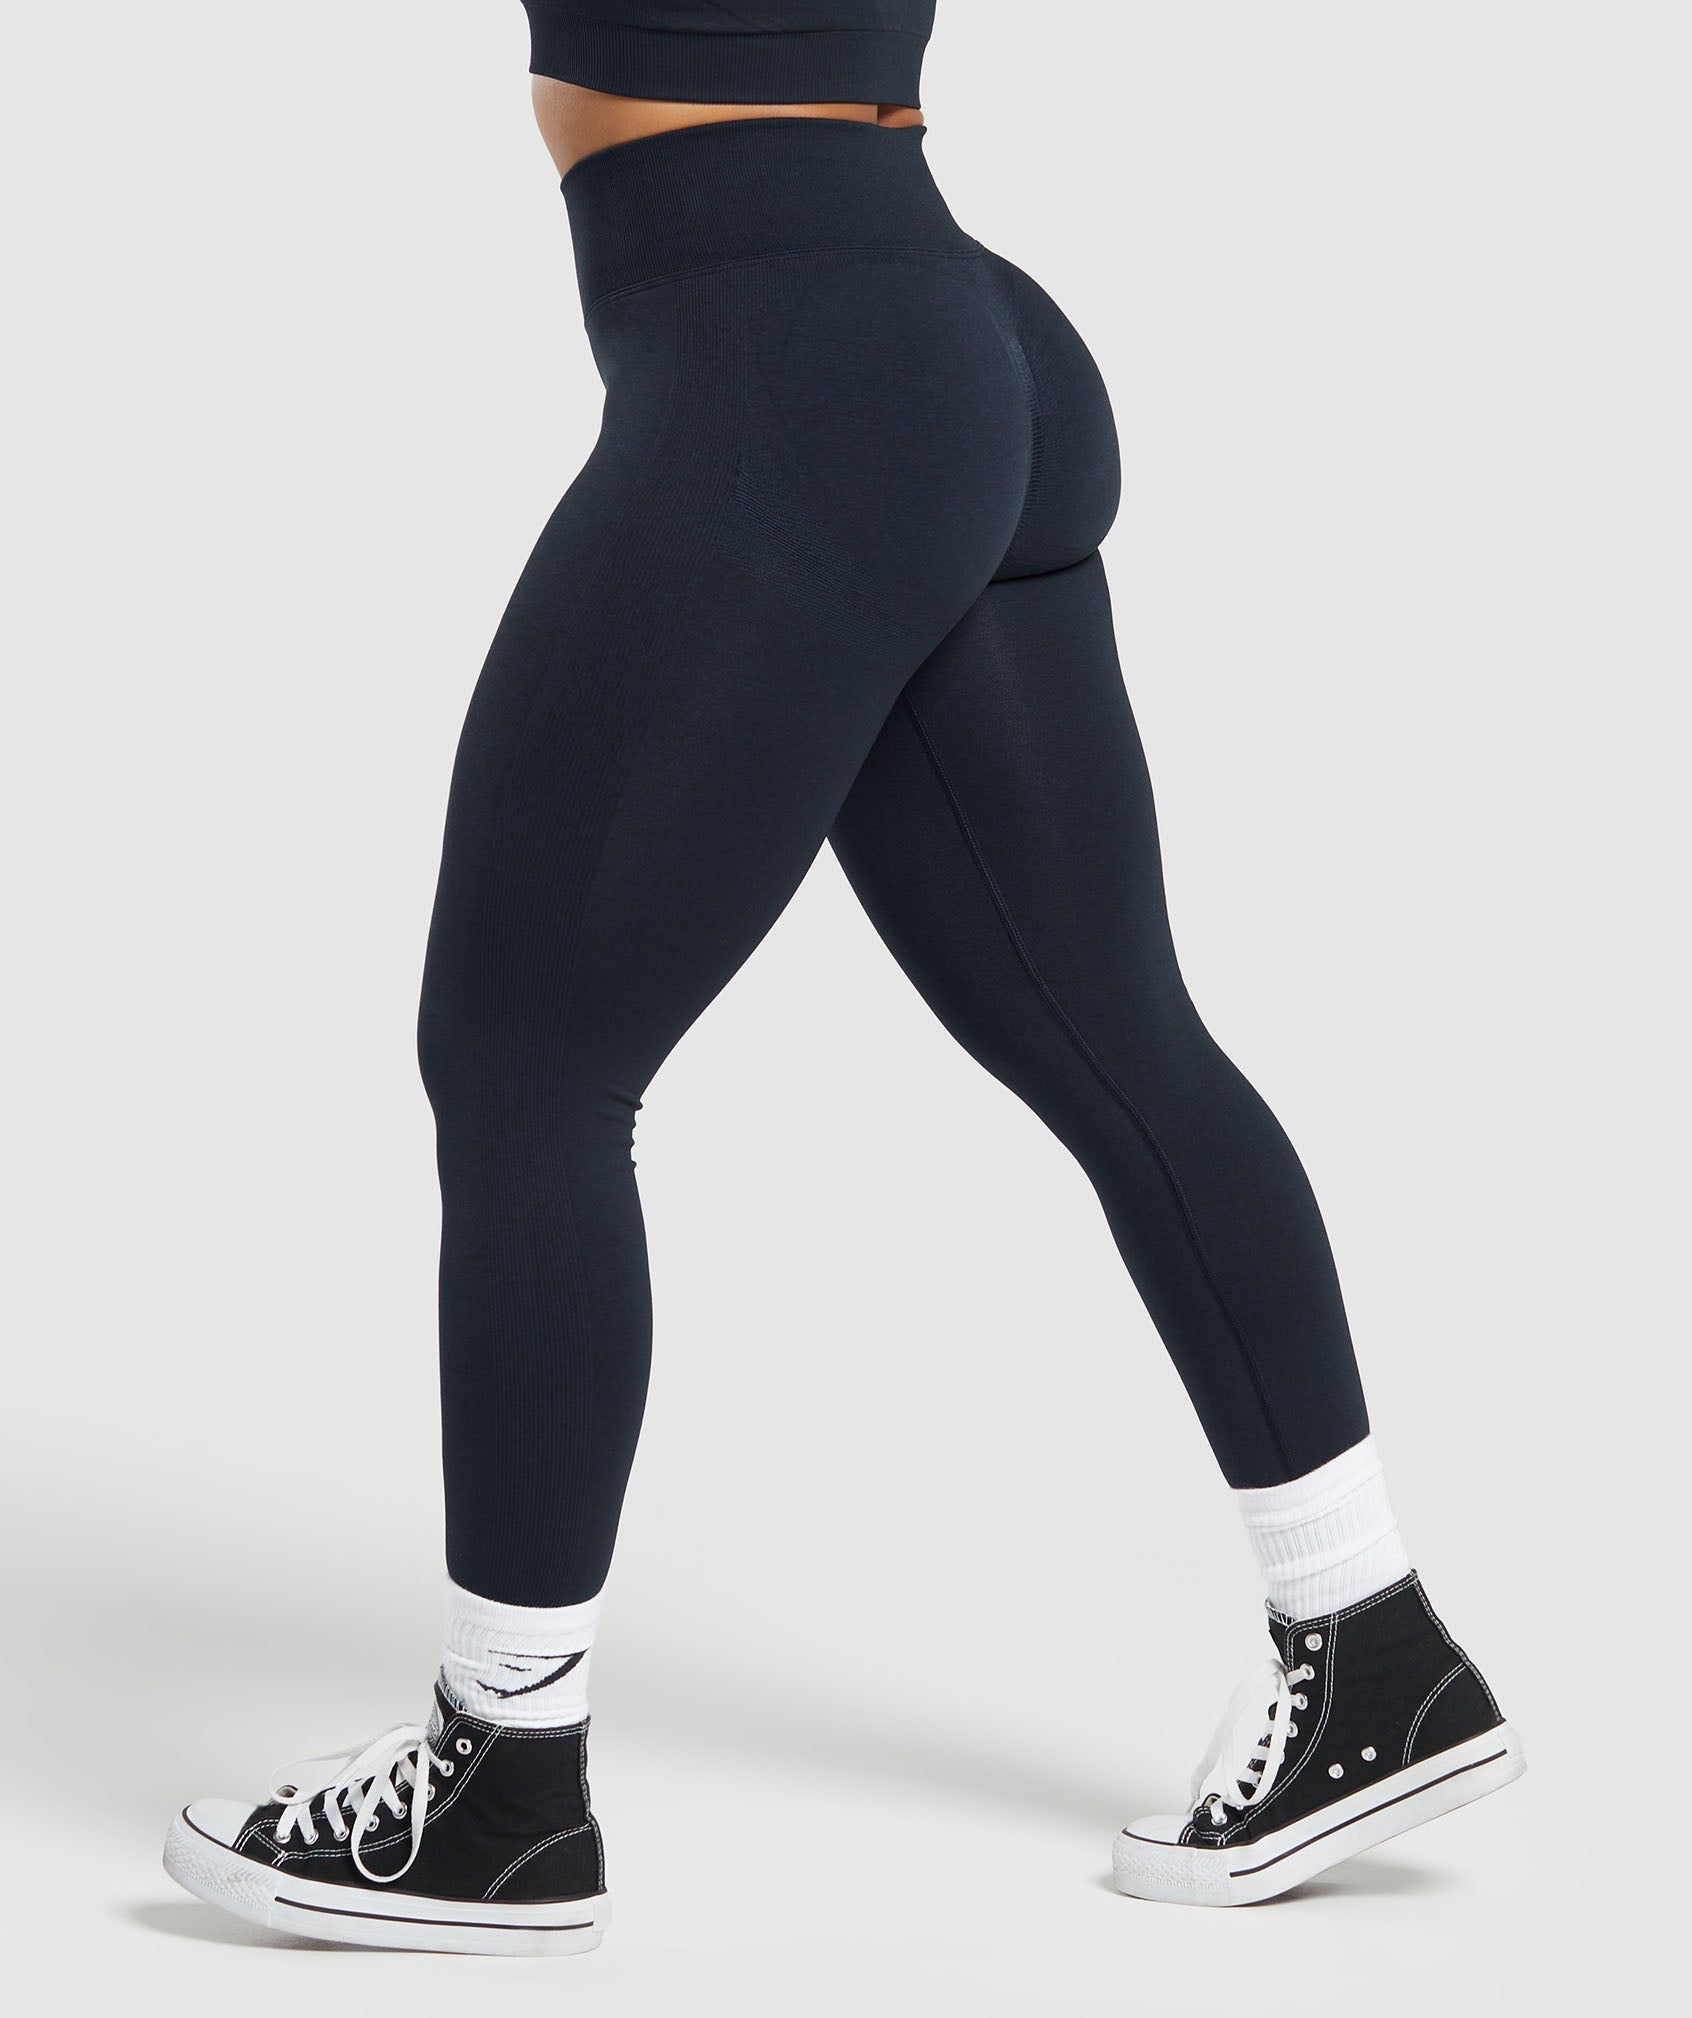 Lift Contour Seamless Leggings in Midnight Blue/Black Marl - view 3